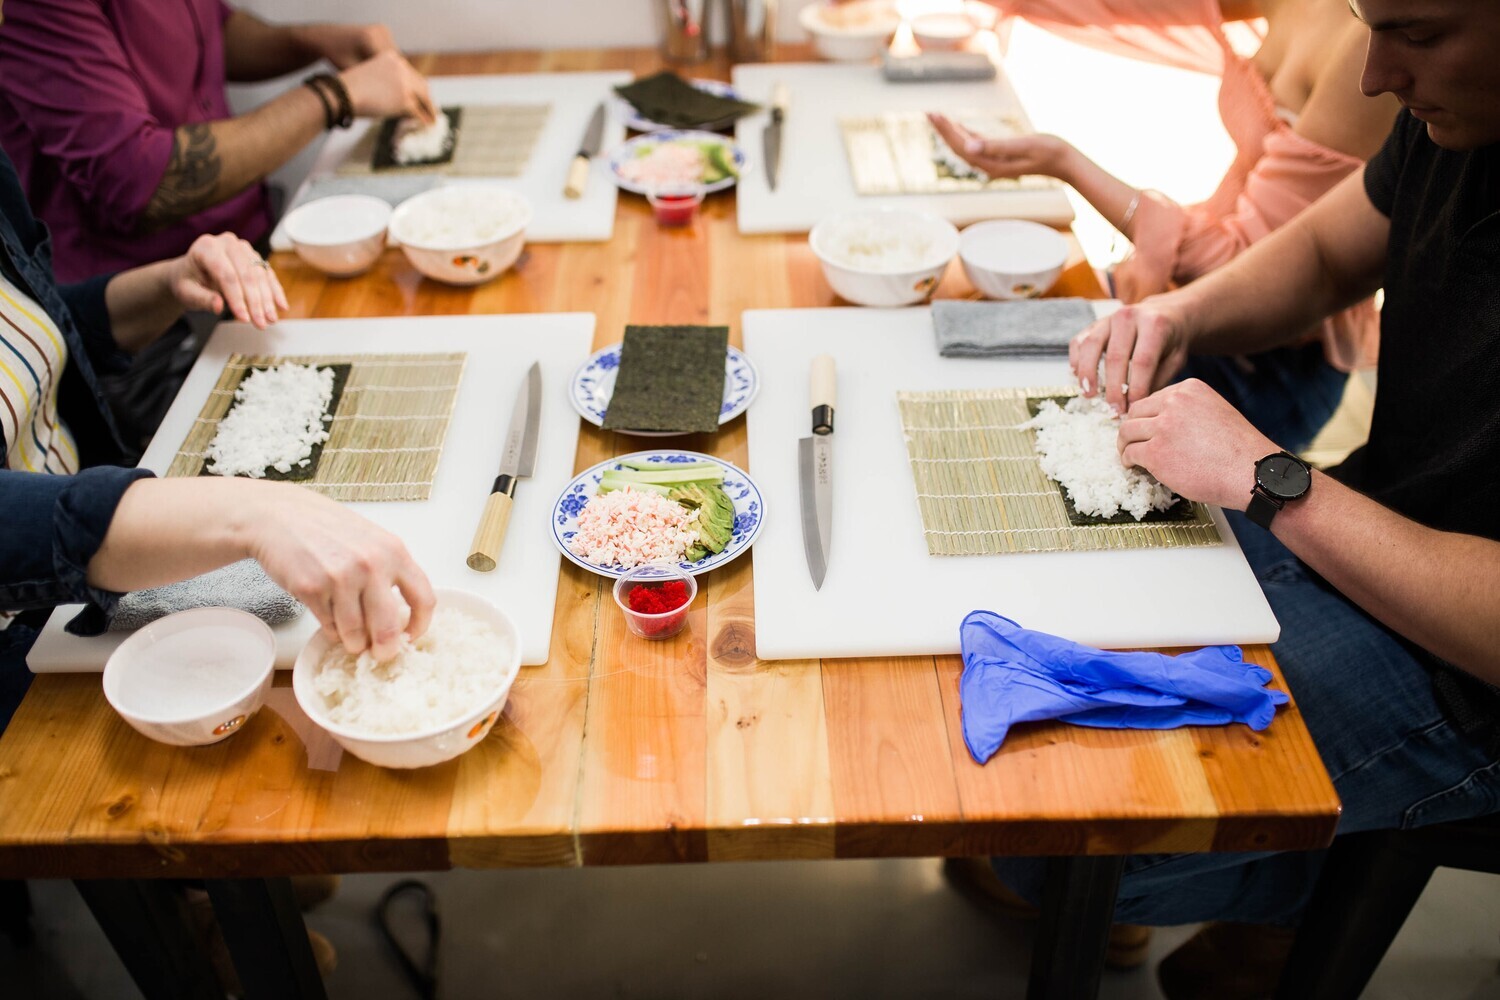 5/29/22 - Intro to Making Sushi Class